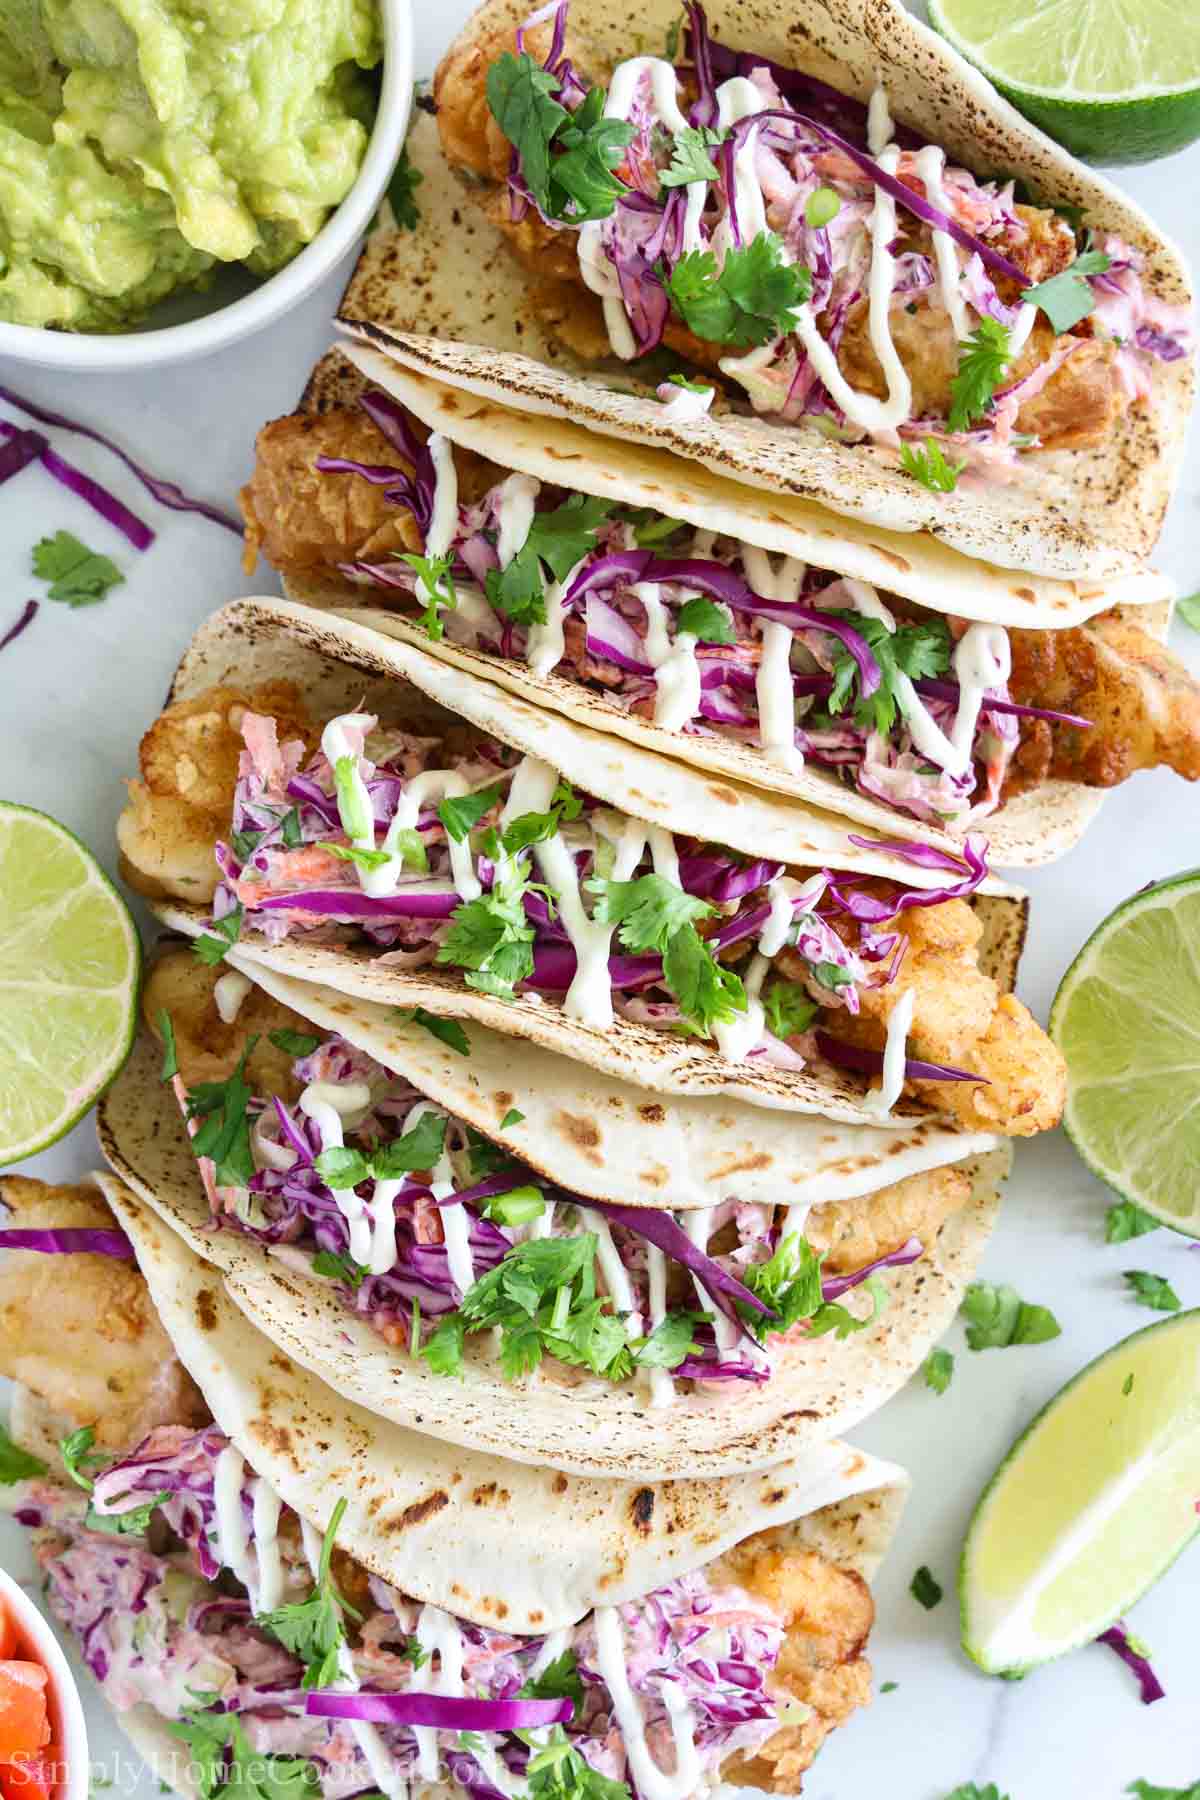 Row of Fish Tacos with limes and guacamole on the side